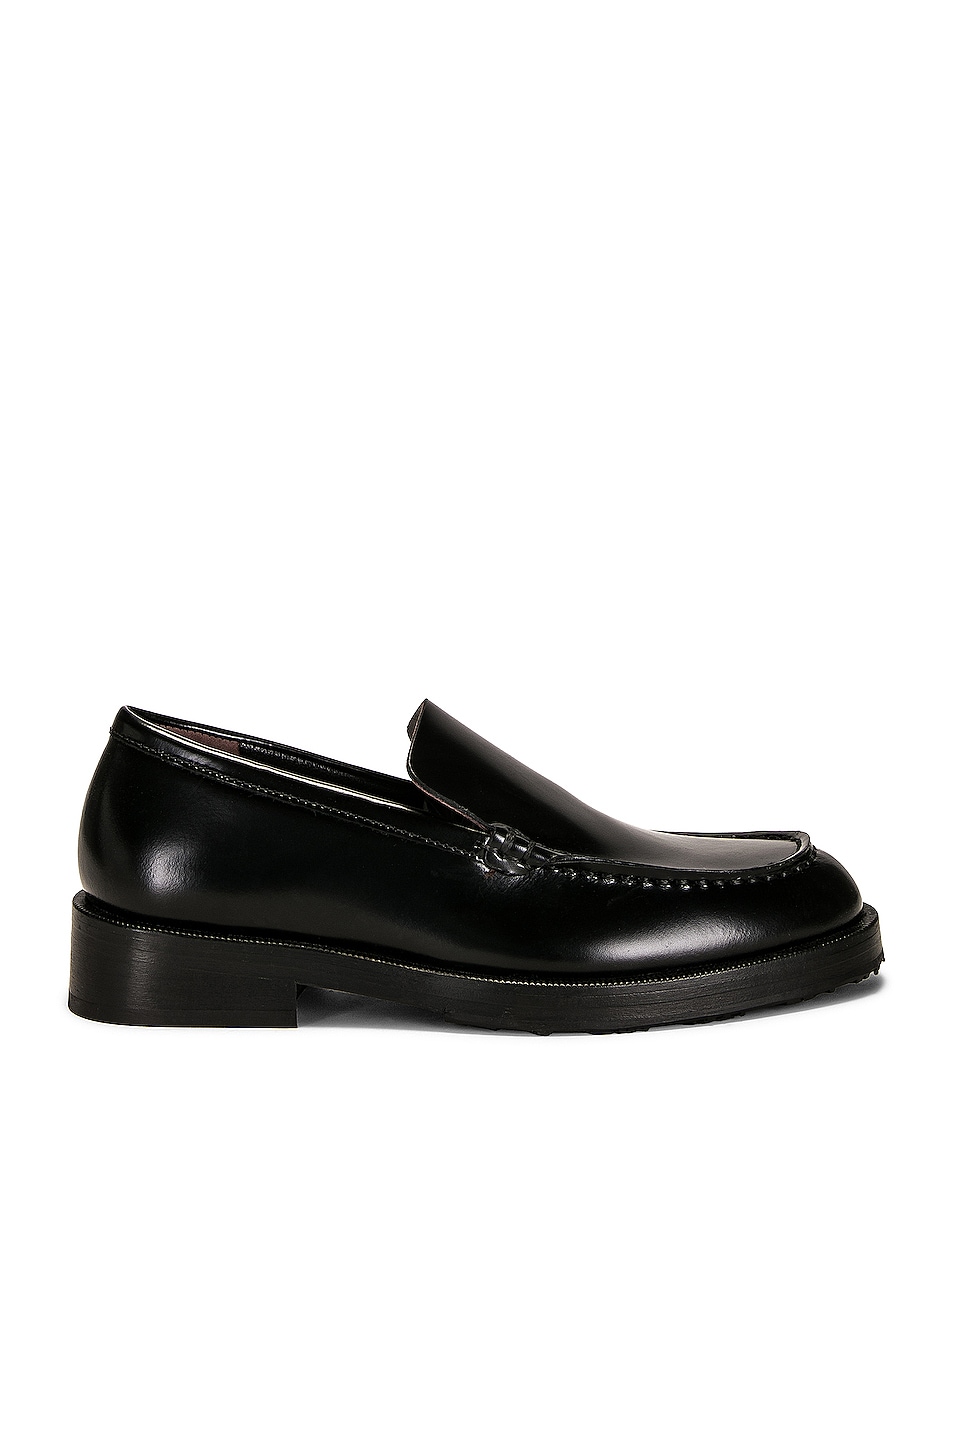 Image 1 of BY FAR Rafael Semi Patent Leather Loafer in Black